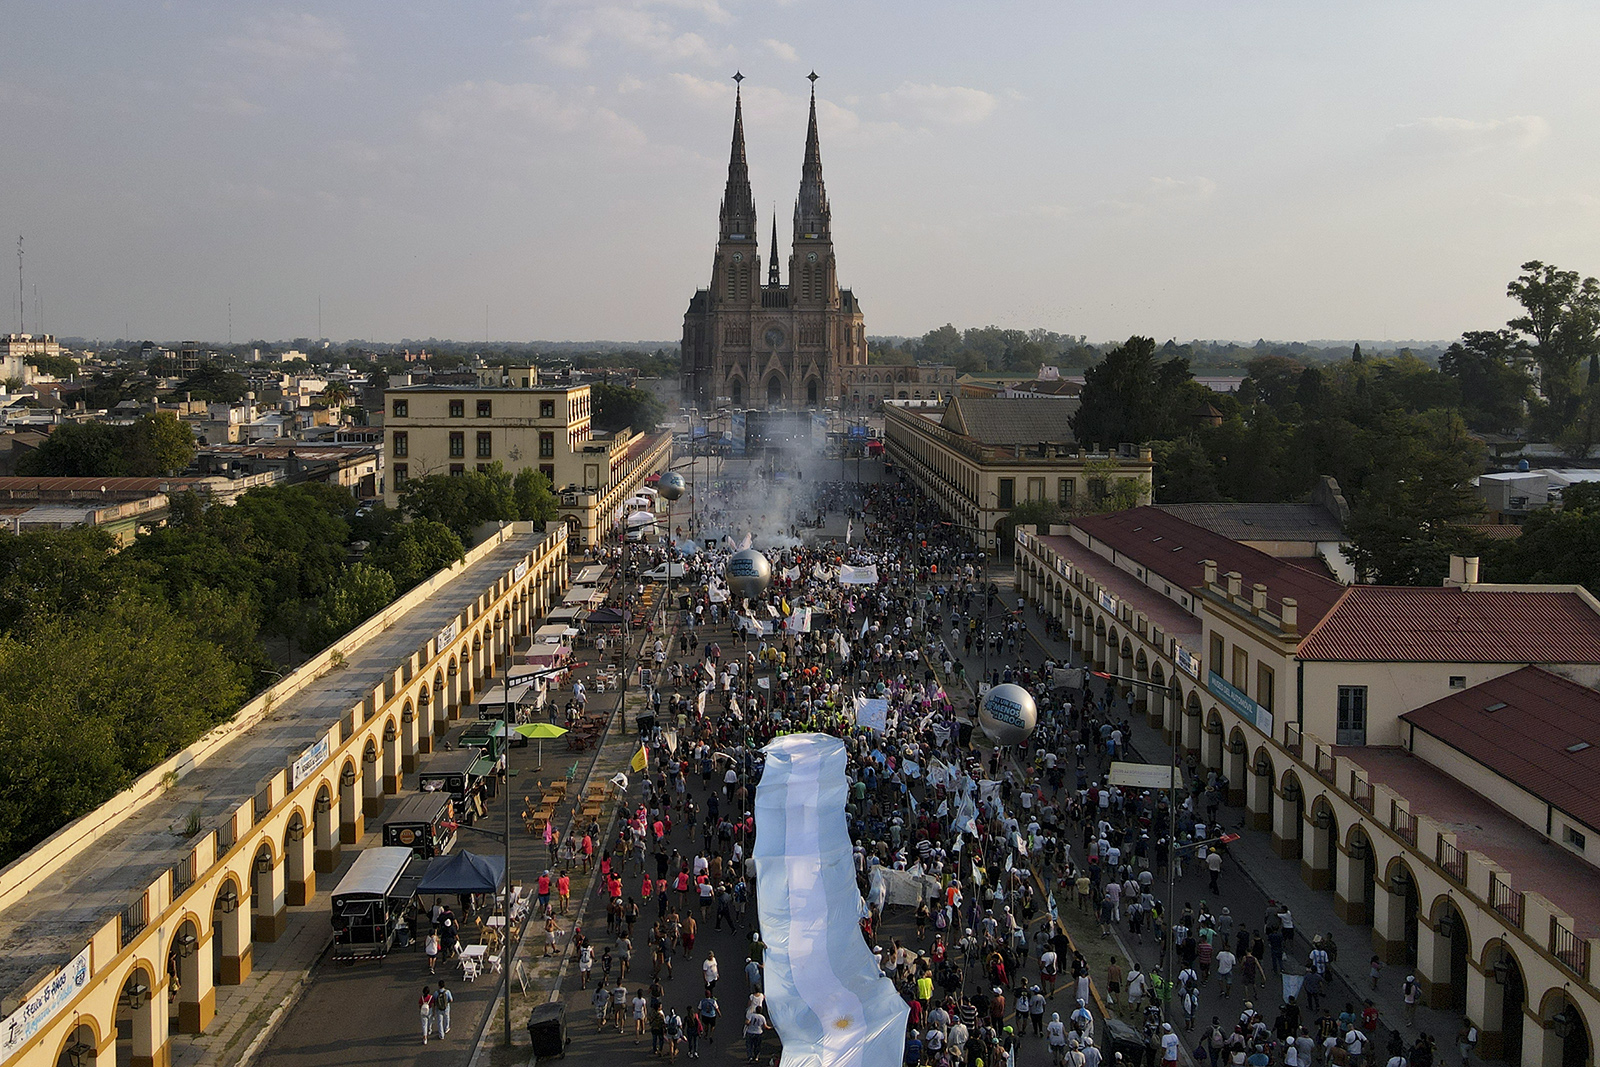 Faithful walk towards the Cathedral to attend a Mass celebrating 15 years of the Familia Grande Hogar de Cristo organization that works to rehabilitate drug addicts and marking Pope Francis' 10 year anniversary as Pope, in Lujan, Argentina, Saturday, March 11, 2023. (AP Photo/Natacha Pisarenko)